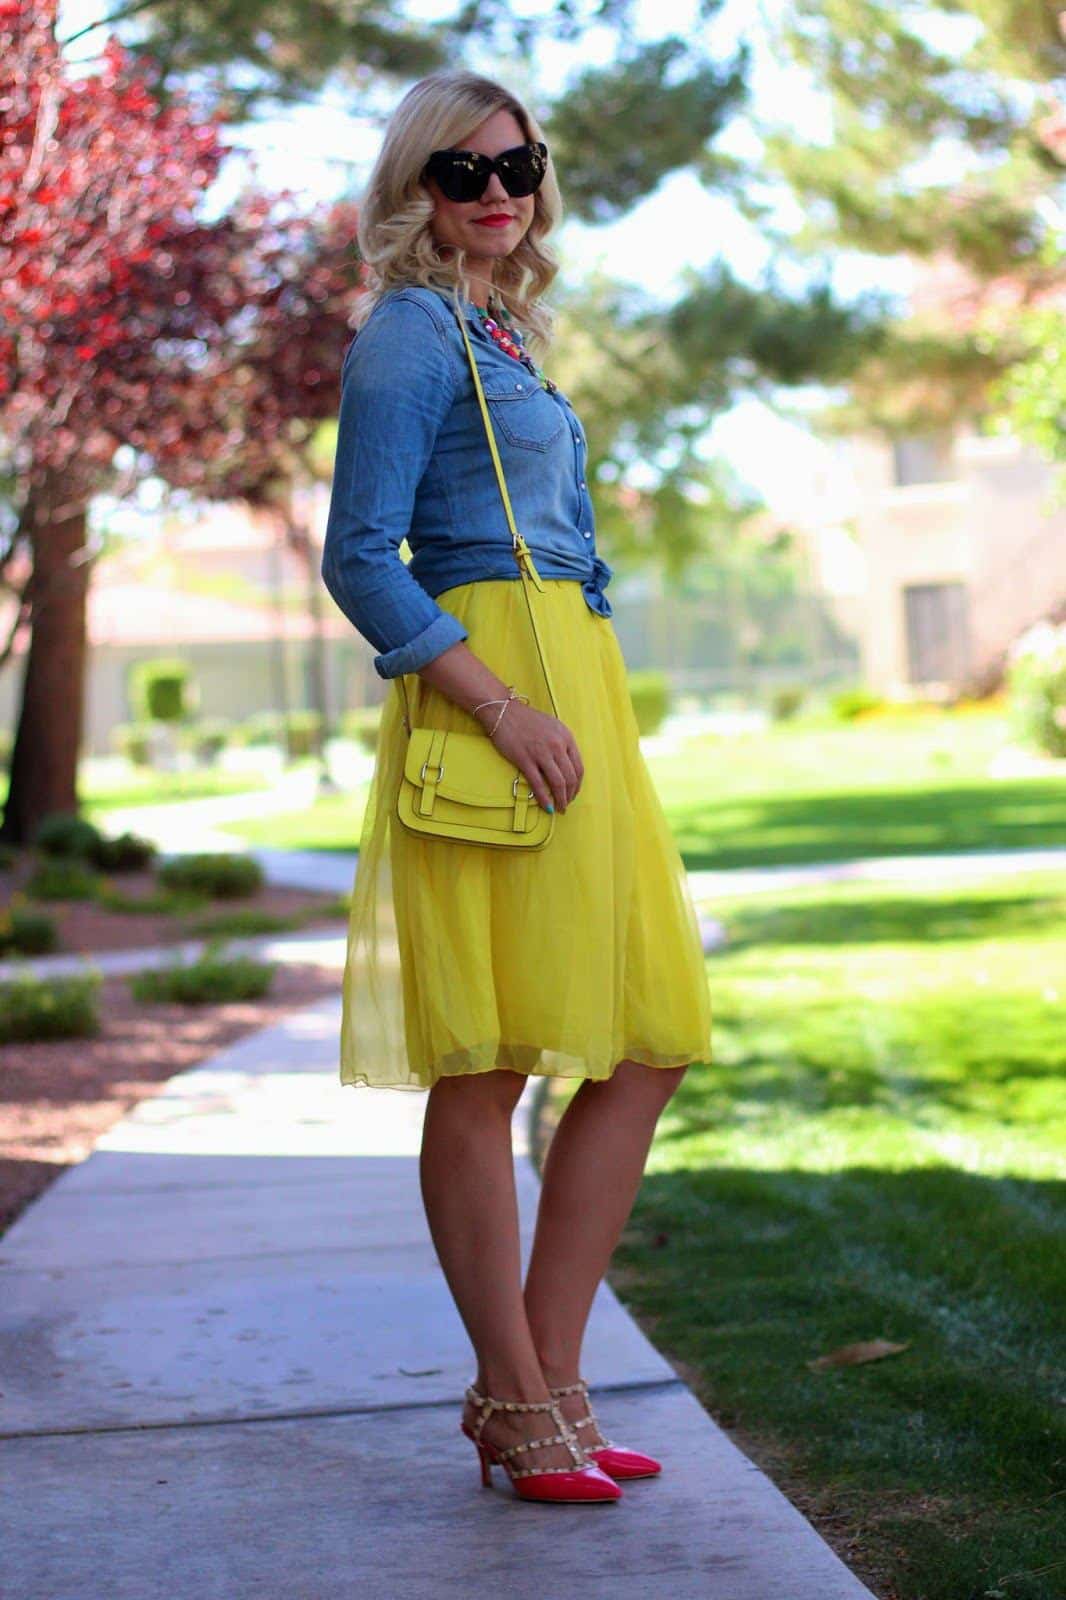 Yellow Skirt Outfits- 27 Ideas on How to Wear a Yellow Skirt